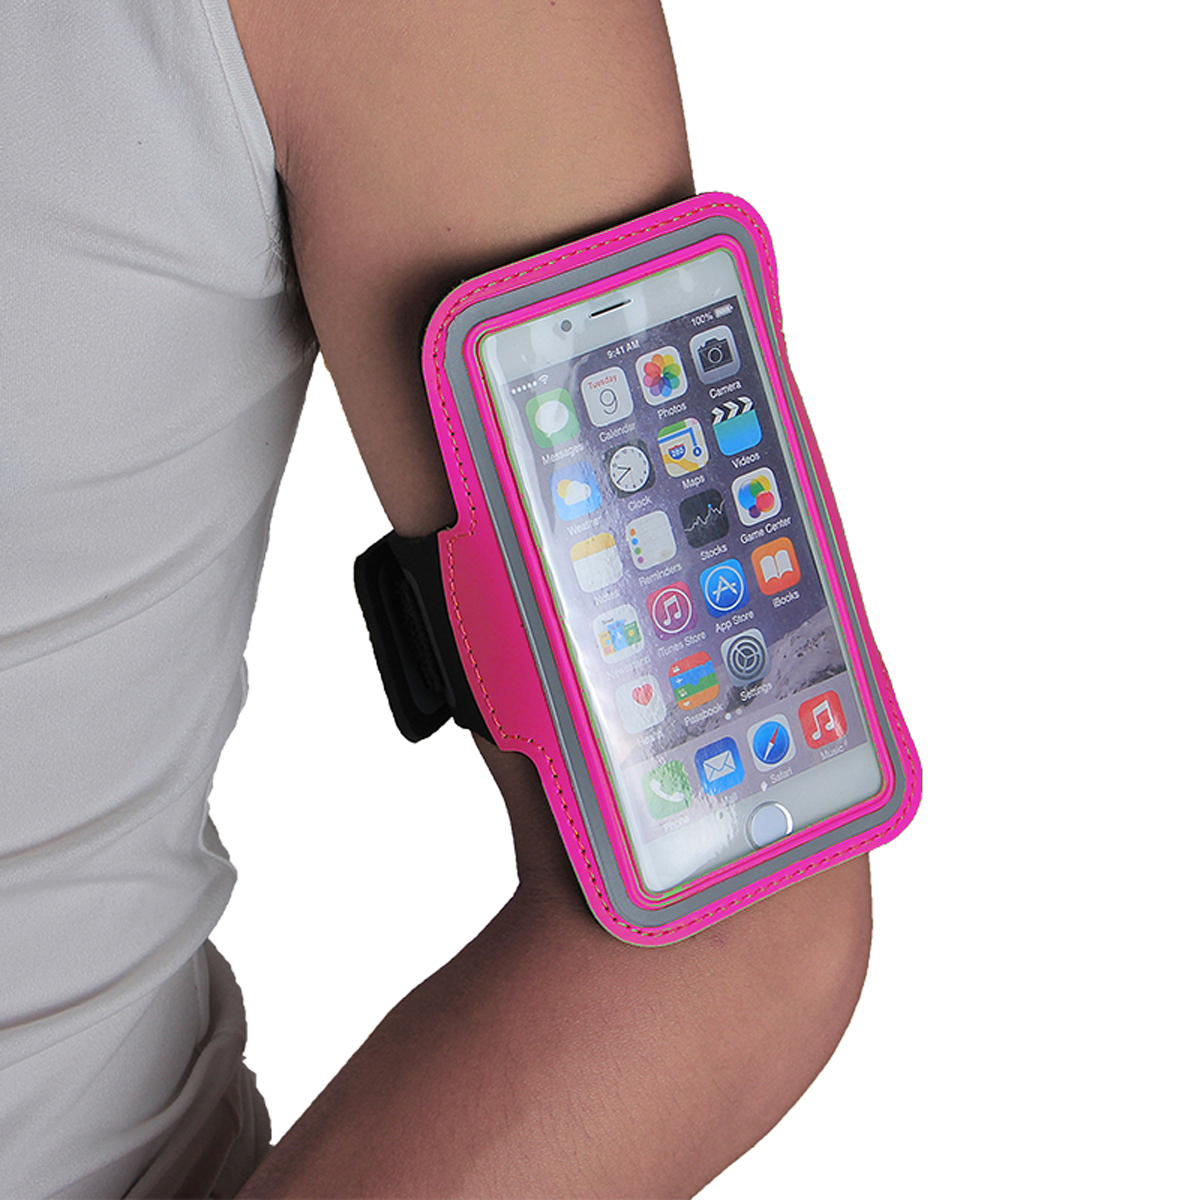 Universal-Sports-Elastic-Armband-Sweatproof-Touch-Screen-Mobile-Phone-Arm-Bags-with-Earphone-Port-fo-1890480-10